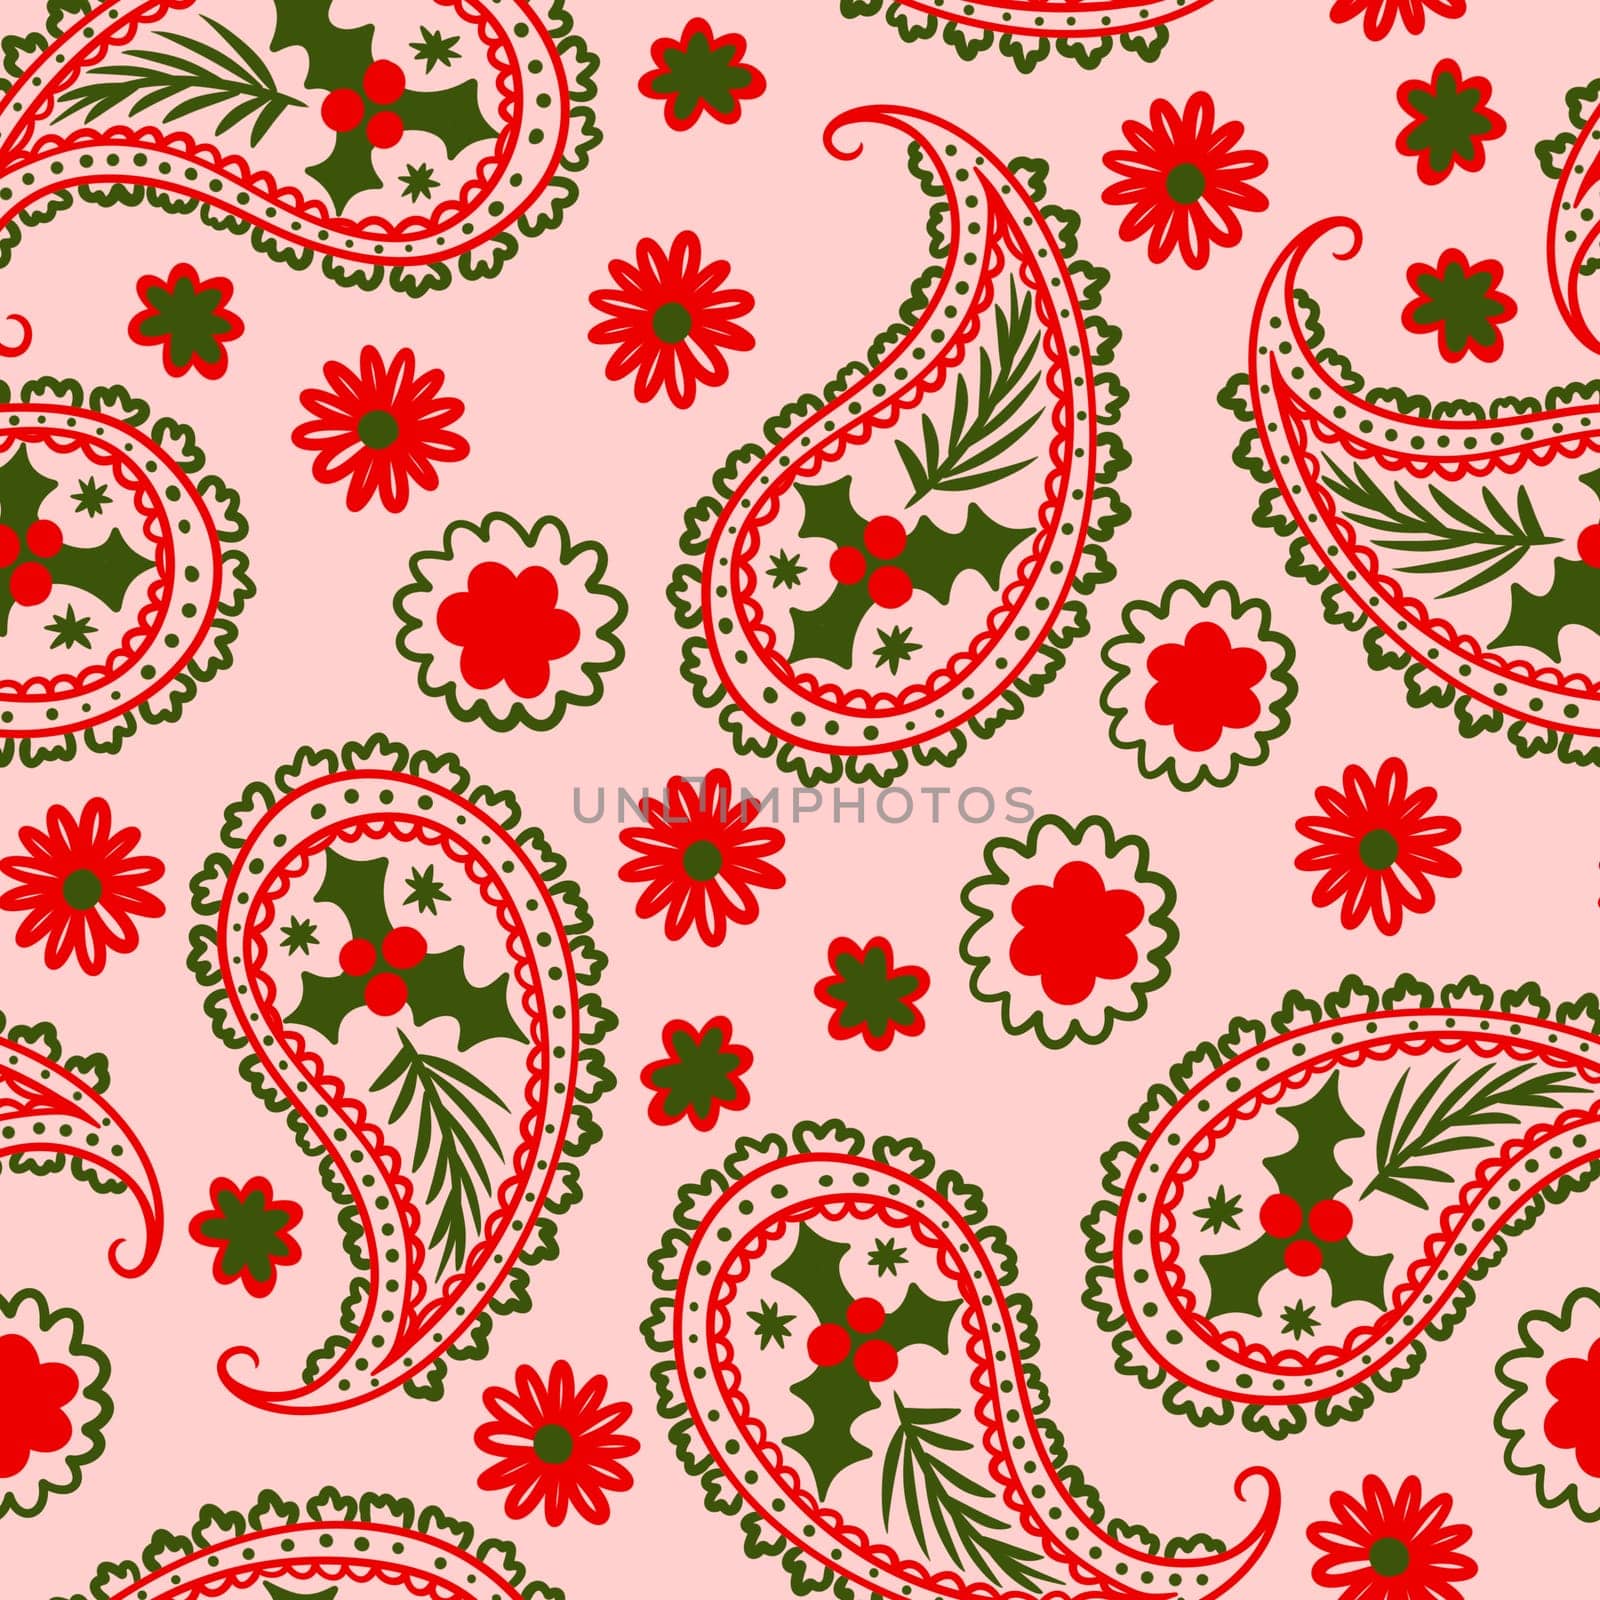 Hand drawn seamless pattern with Christmas winter elements in red green pink, Indian paisley traditional retro vintage holly holiday plant design. Bright colorful print for celebration decoration wrapping paper, merry christmas art. by Lagmar